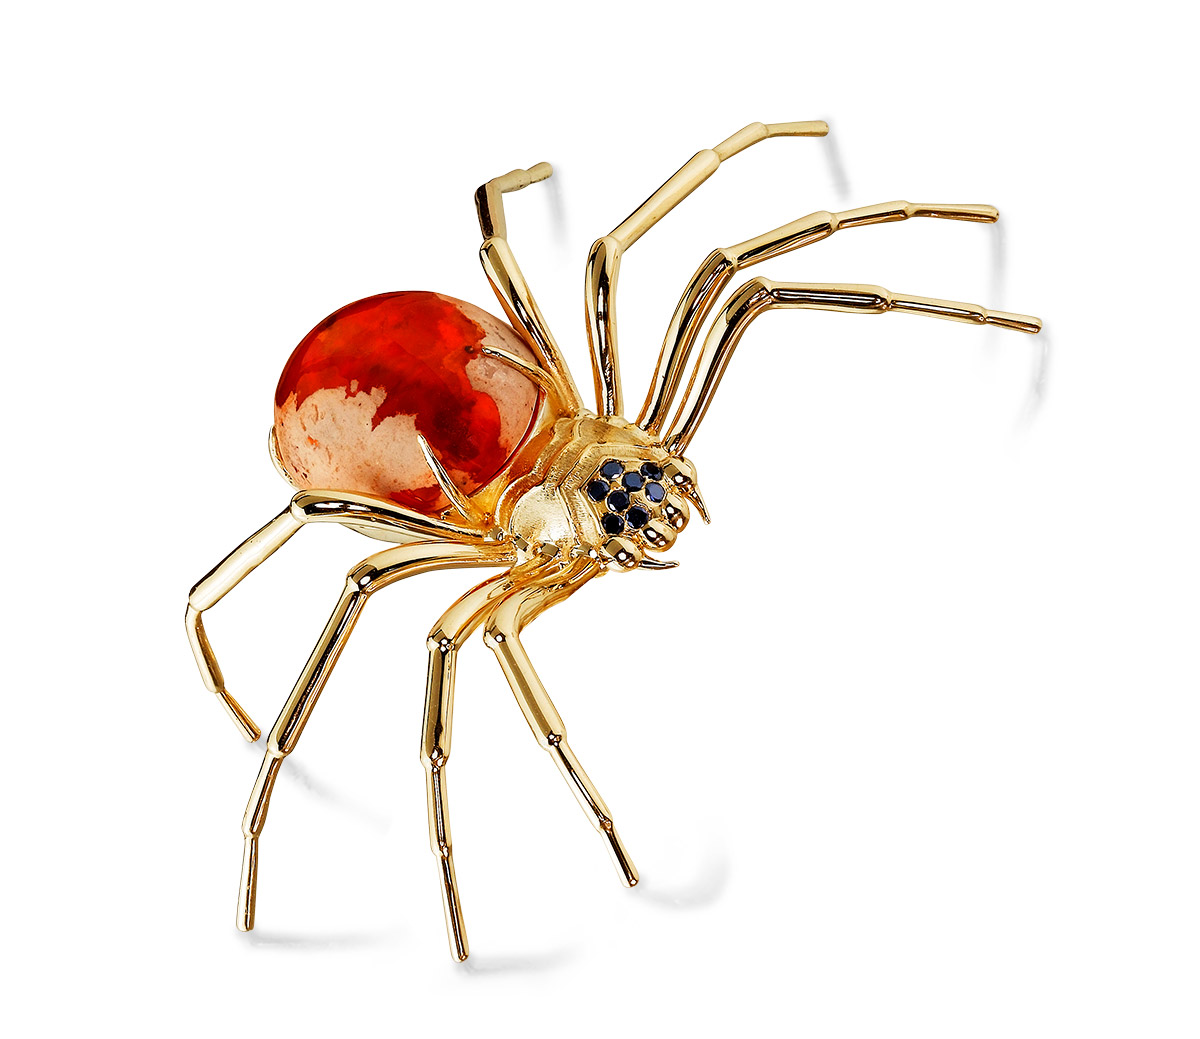 Mens Jewelry Parle fire opal spider brooch